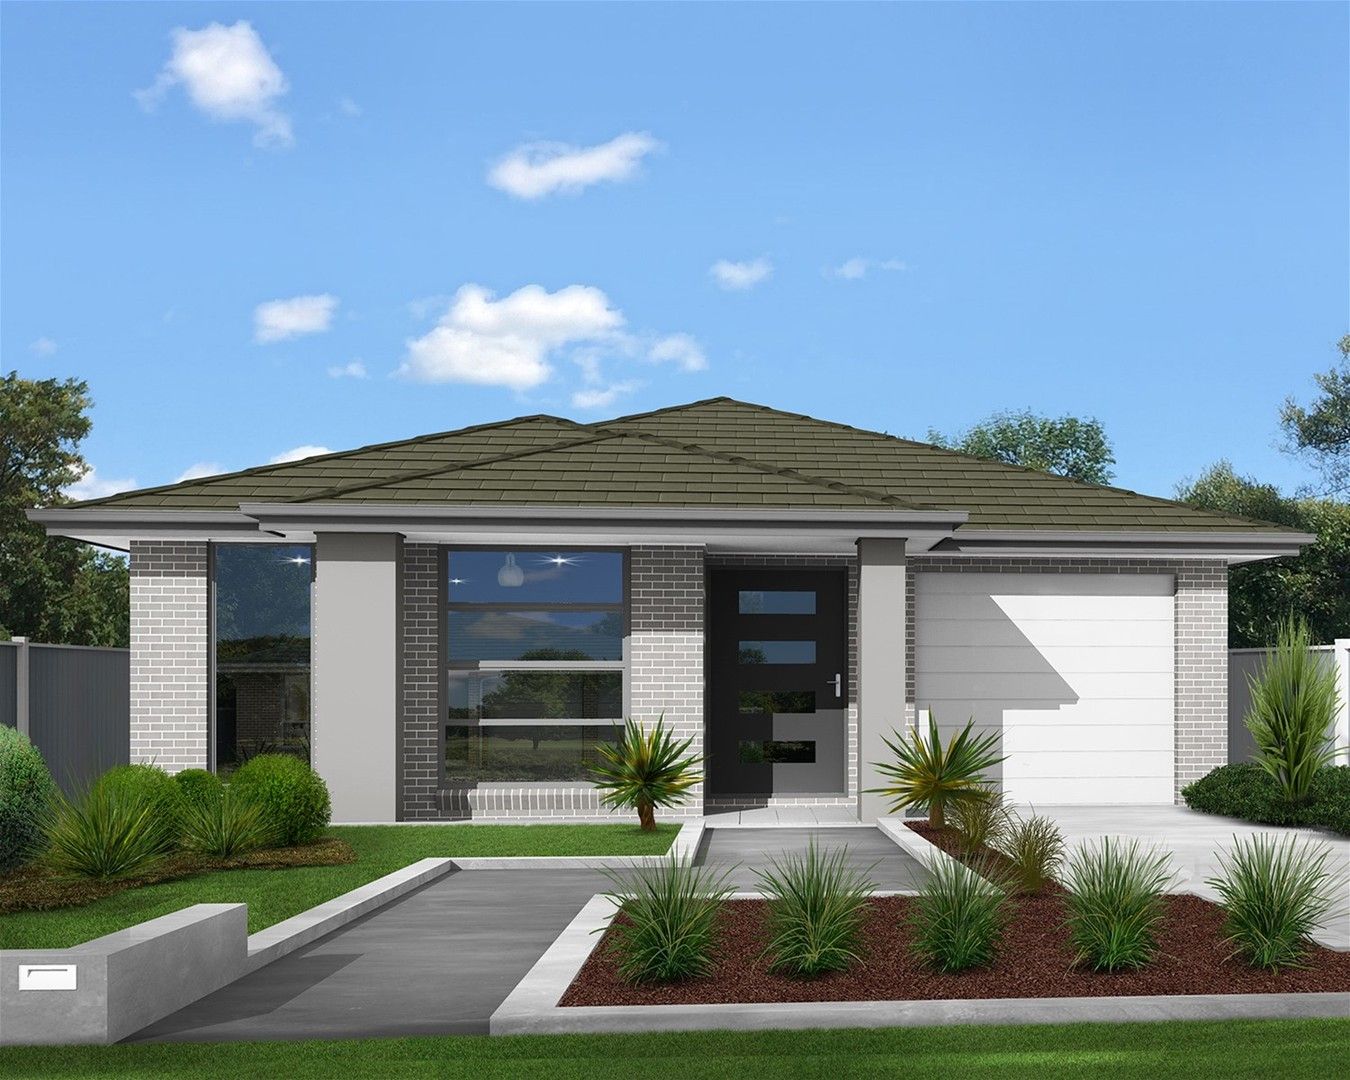 5 bedrooms New House & Land in Lot 25 Rinanna Place ST GEORGES BASIN NSW, 2540